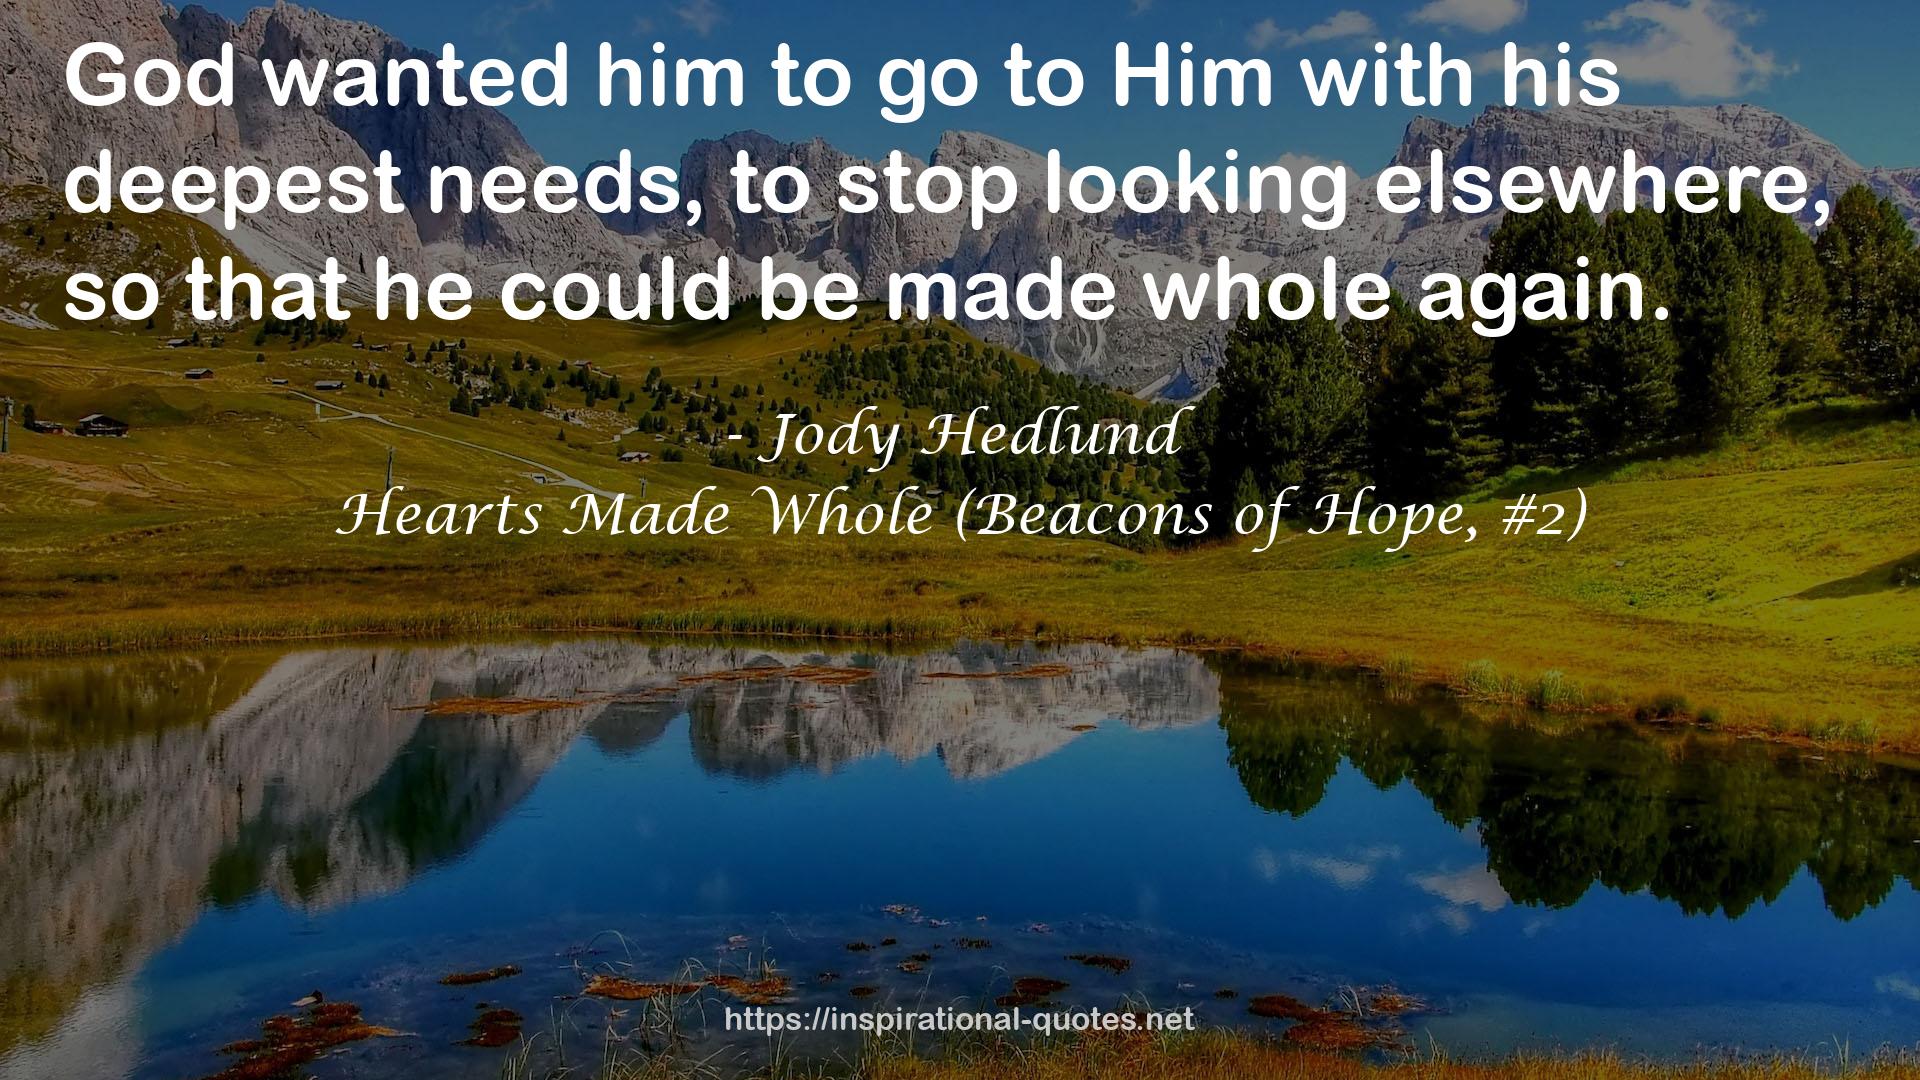 Hearts Made Whole (Beacons of Hope, #2) QUOTES